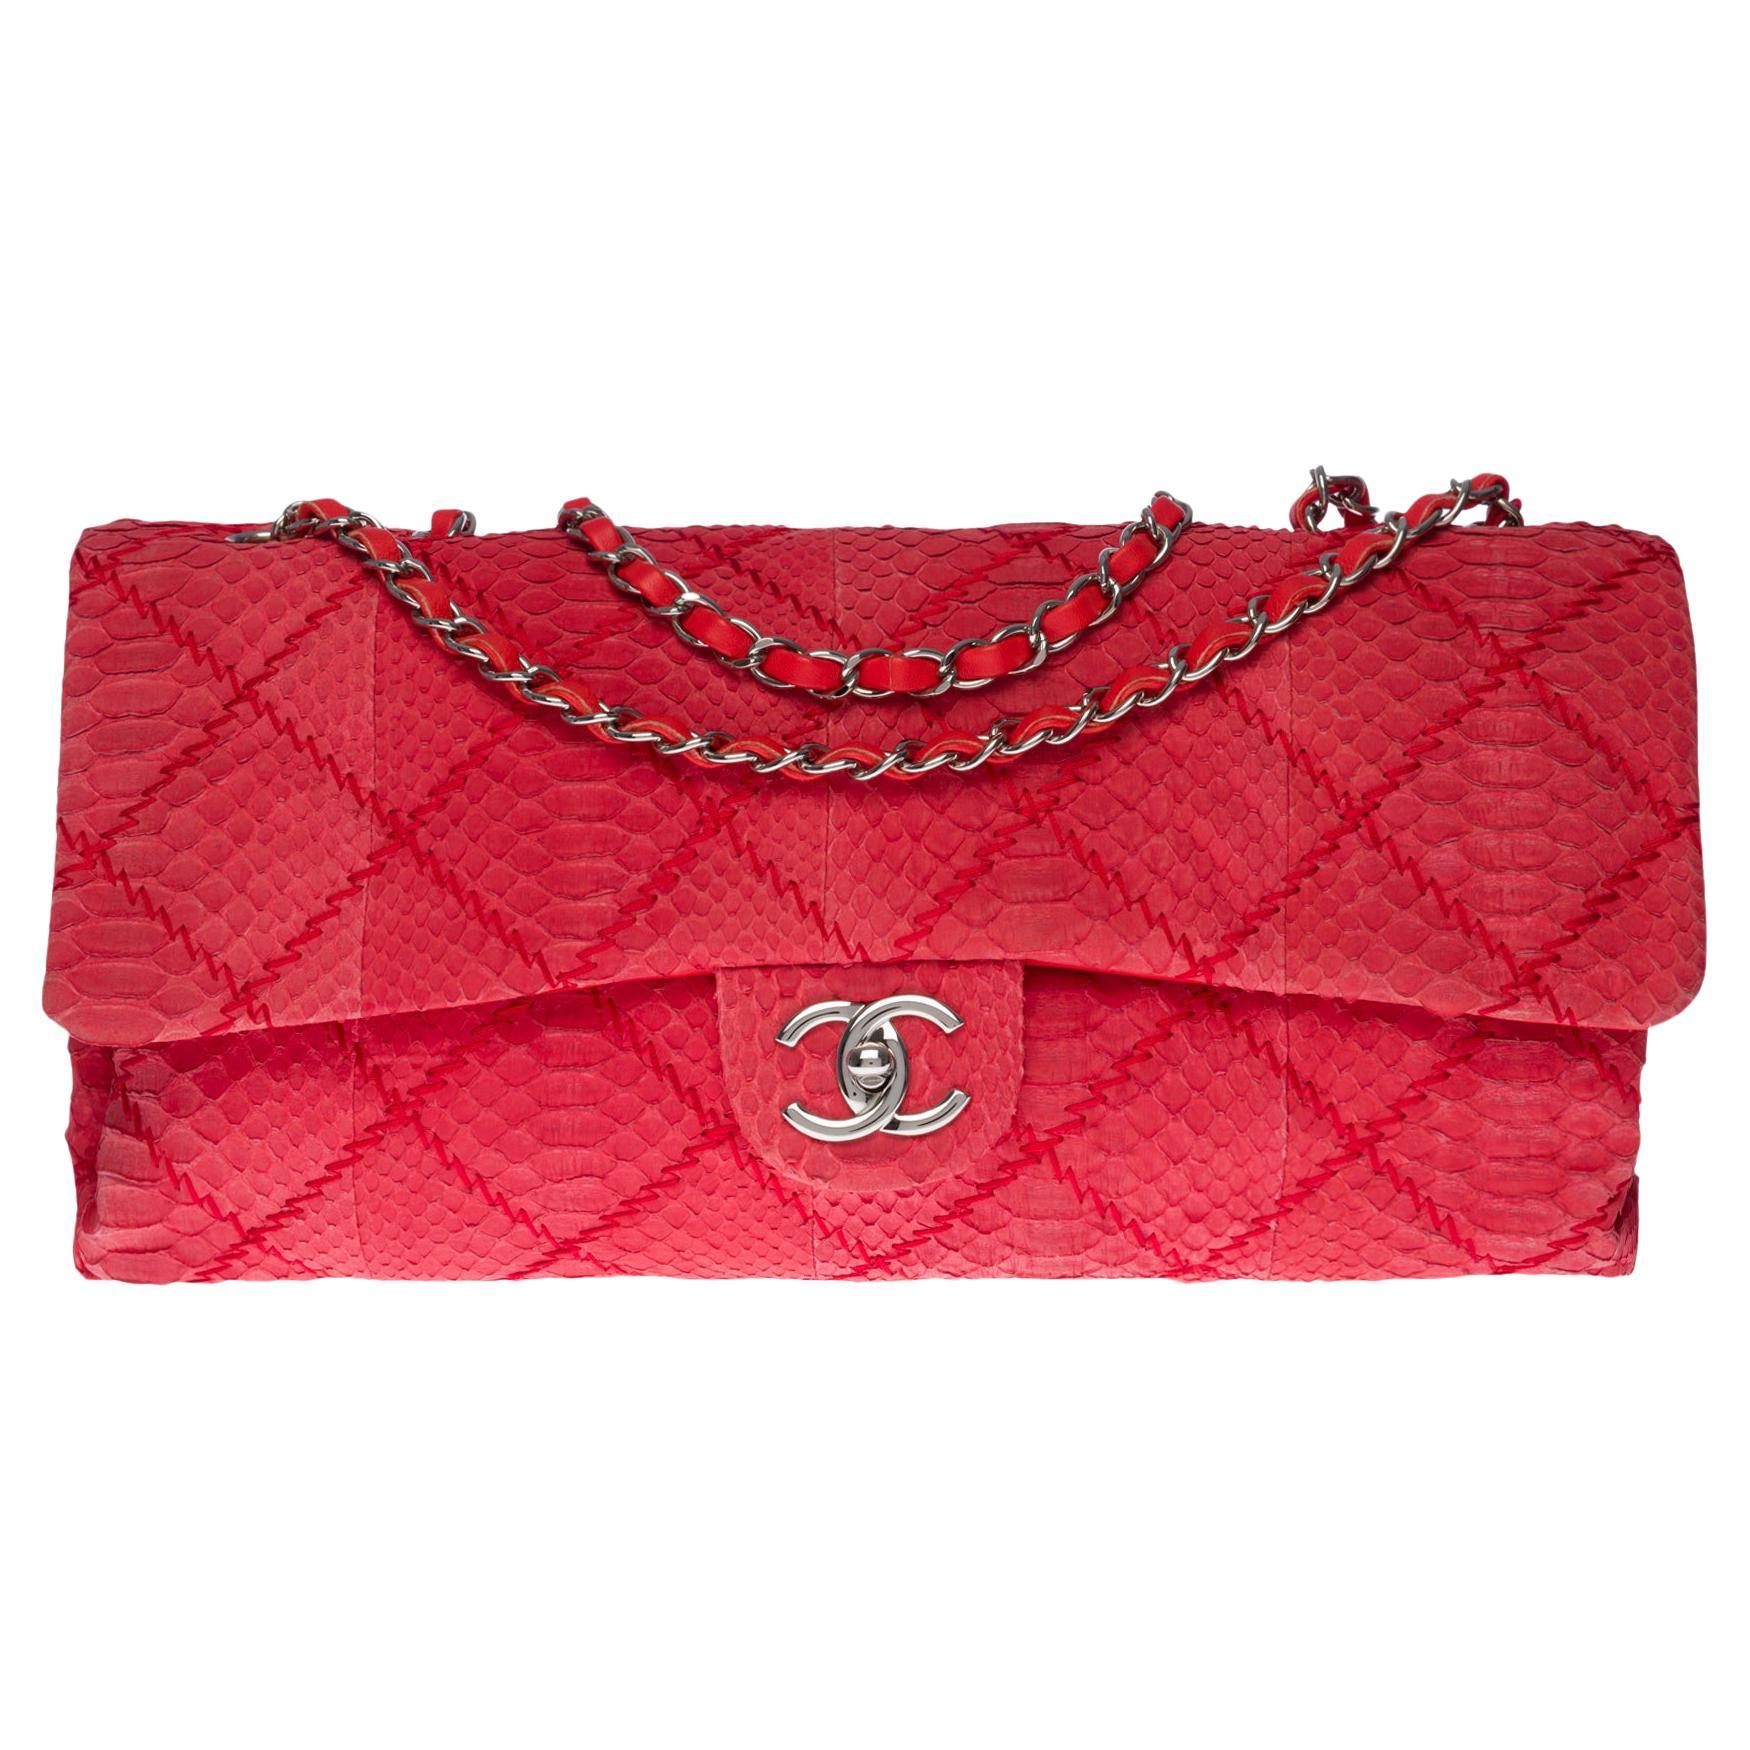 Chanel Classic XL Shoulder Bag in Red Quilted Python, Silver Hardware